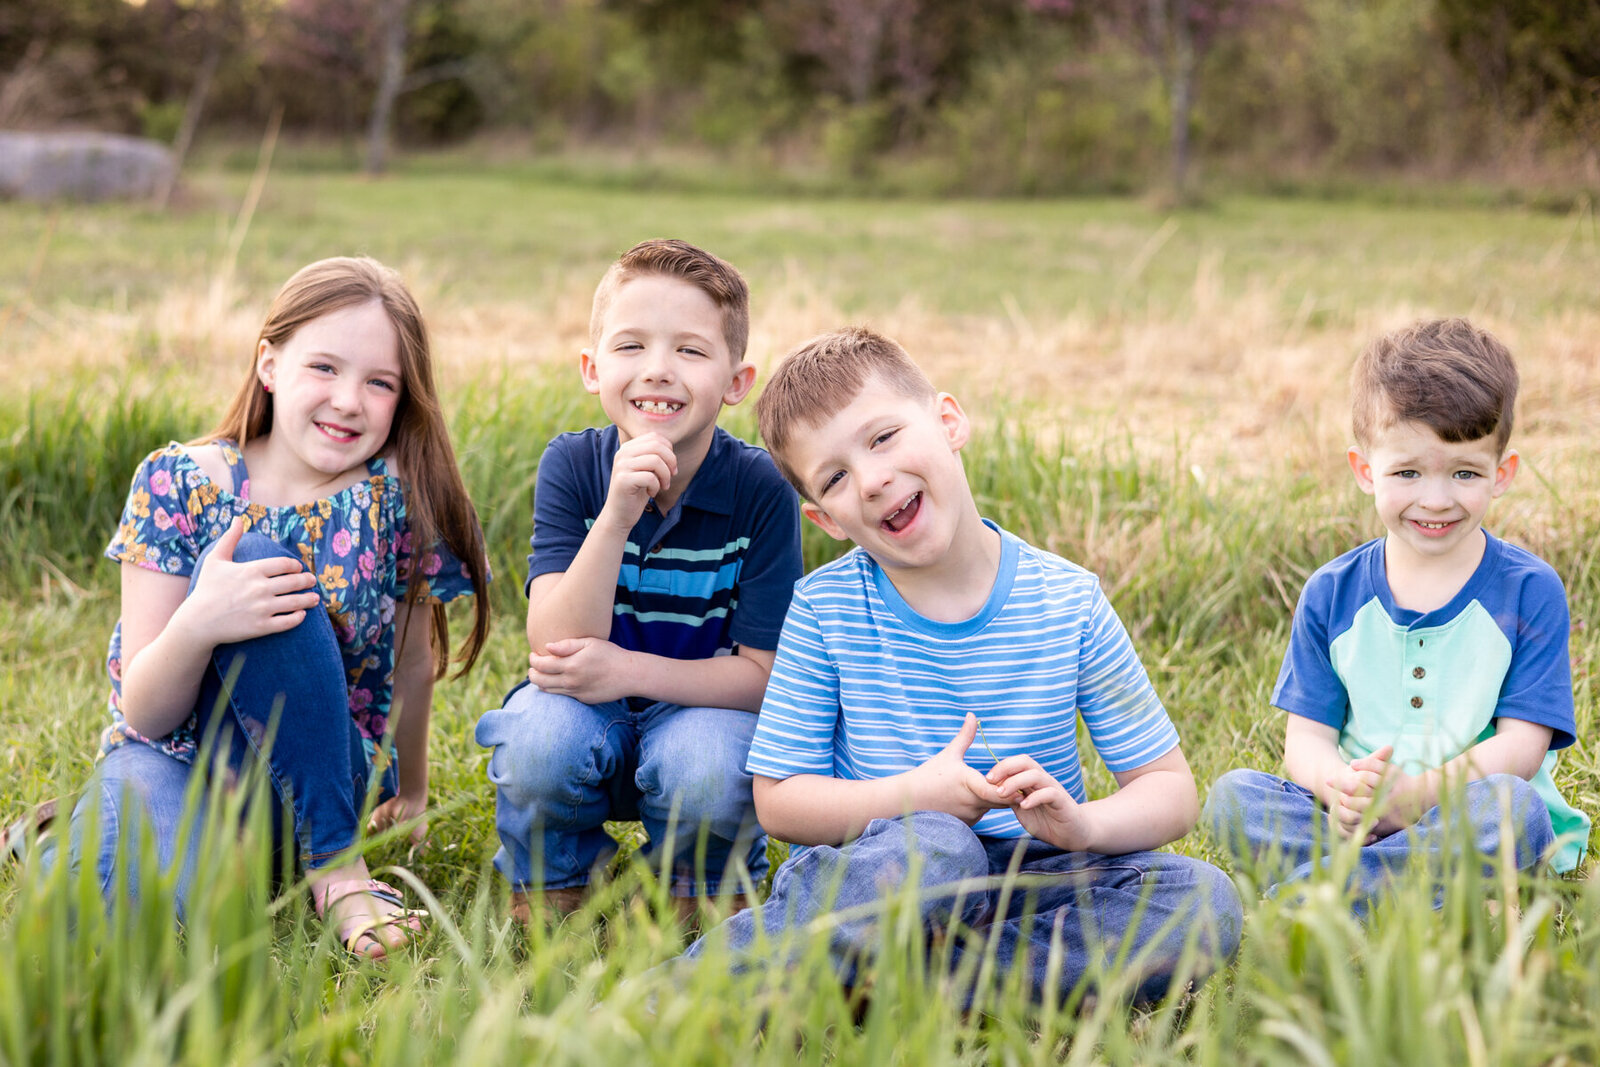 Outdoor-family-lifestyle-photography-session-Frankfort-KY-photographer